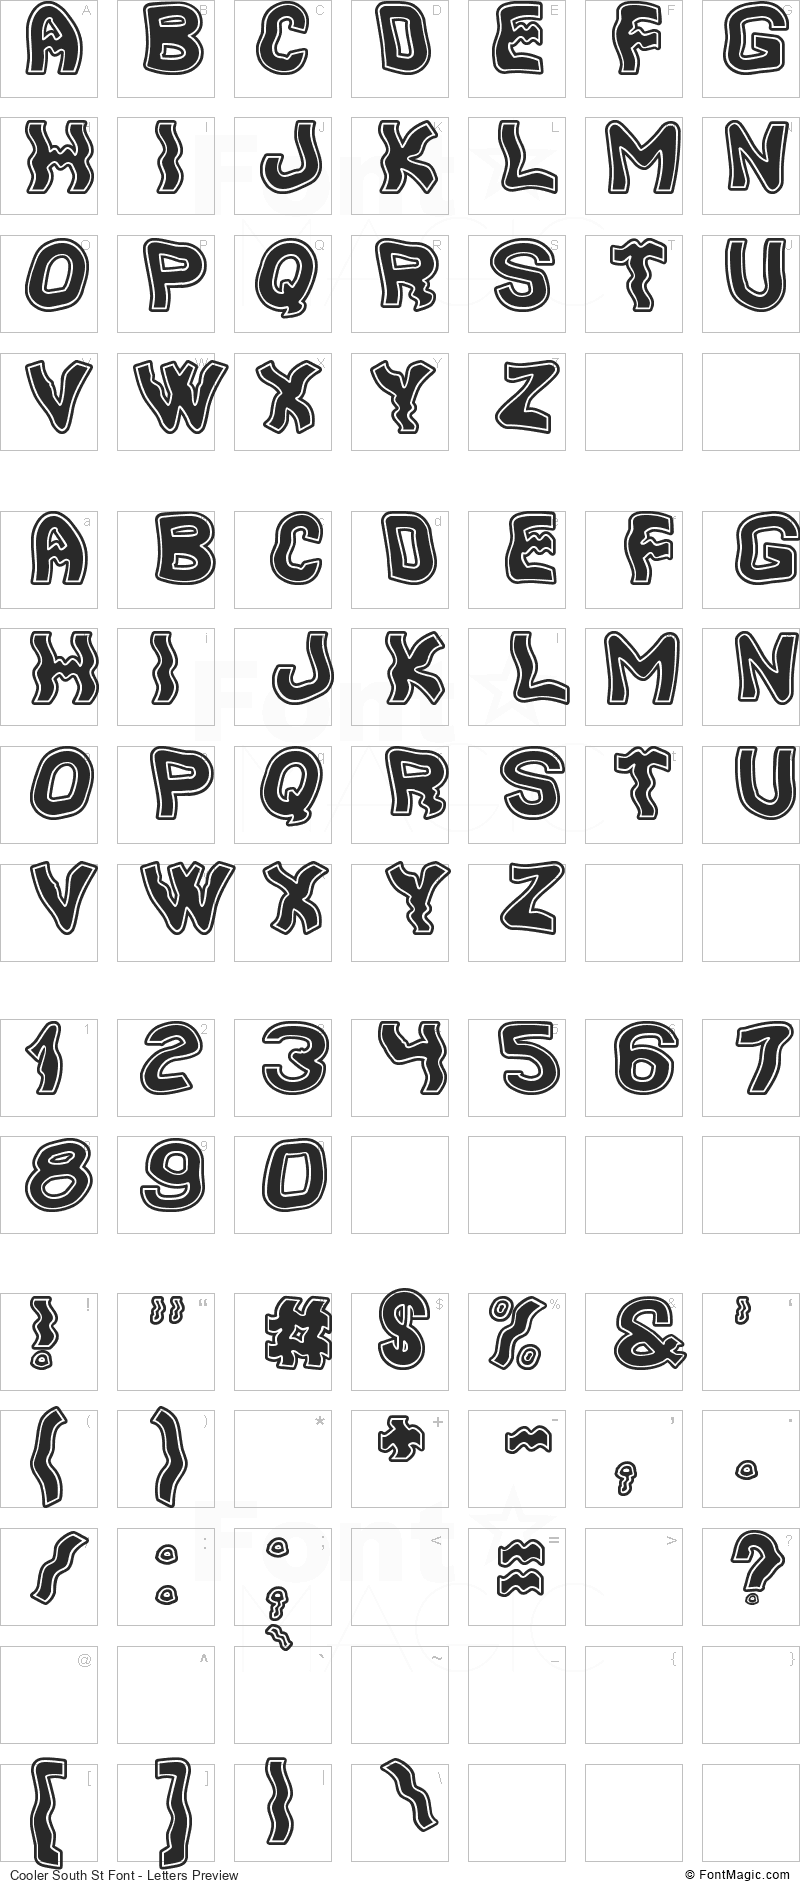 Cooler South St Font - All Latters Preview Chart